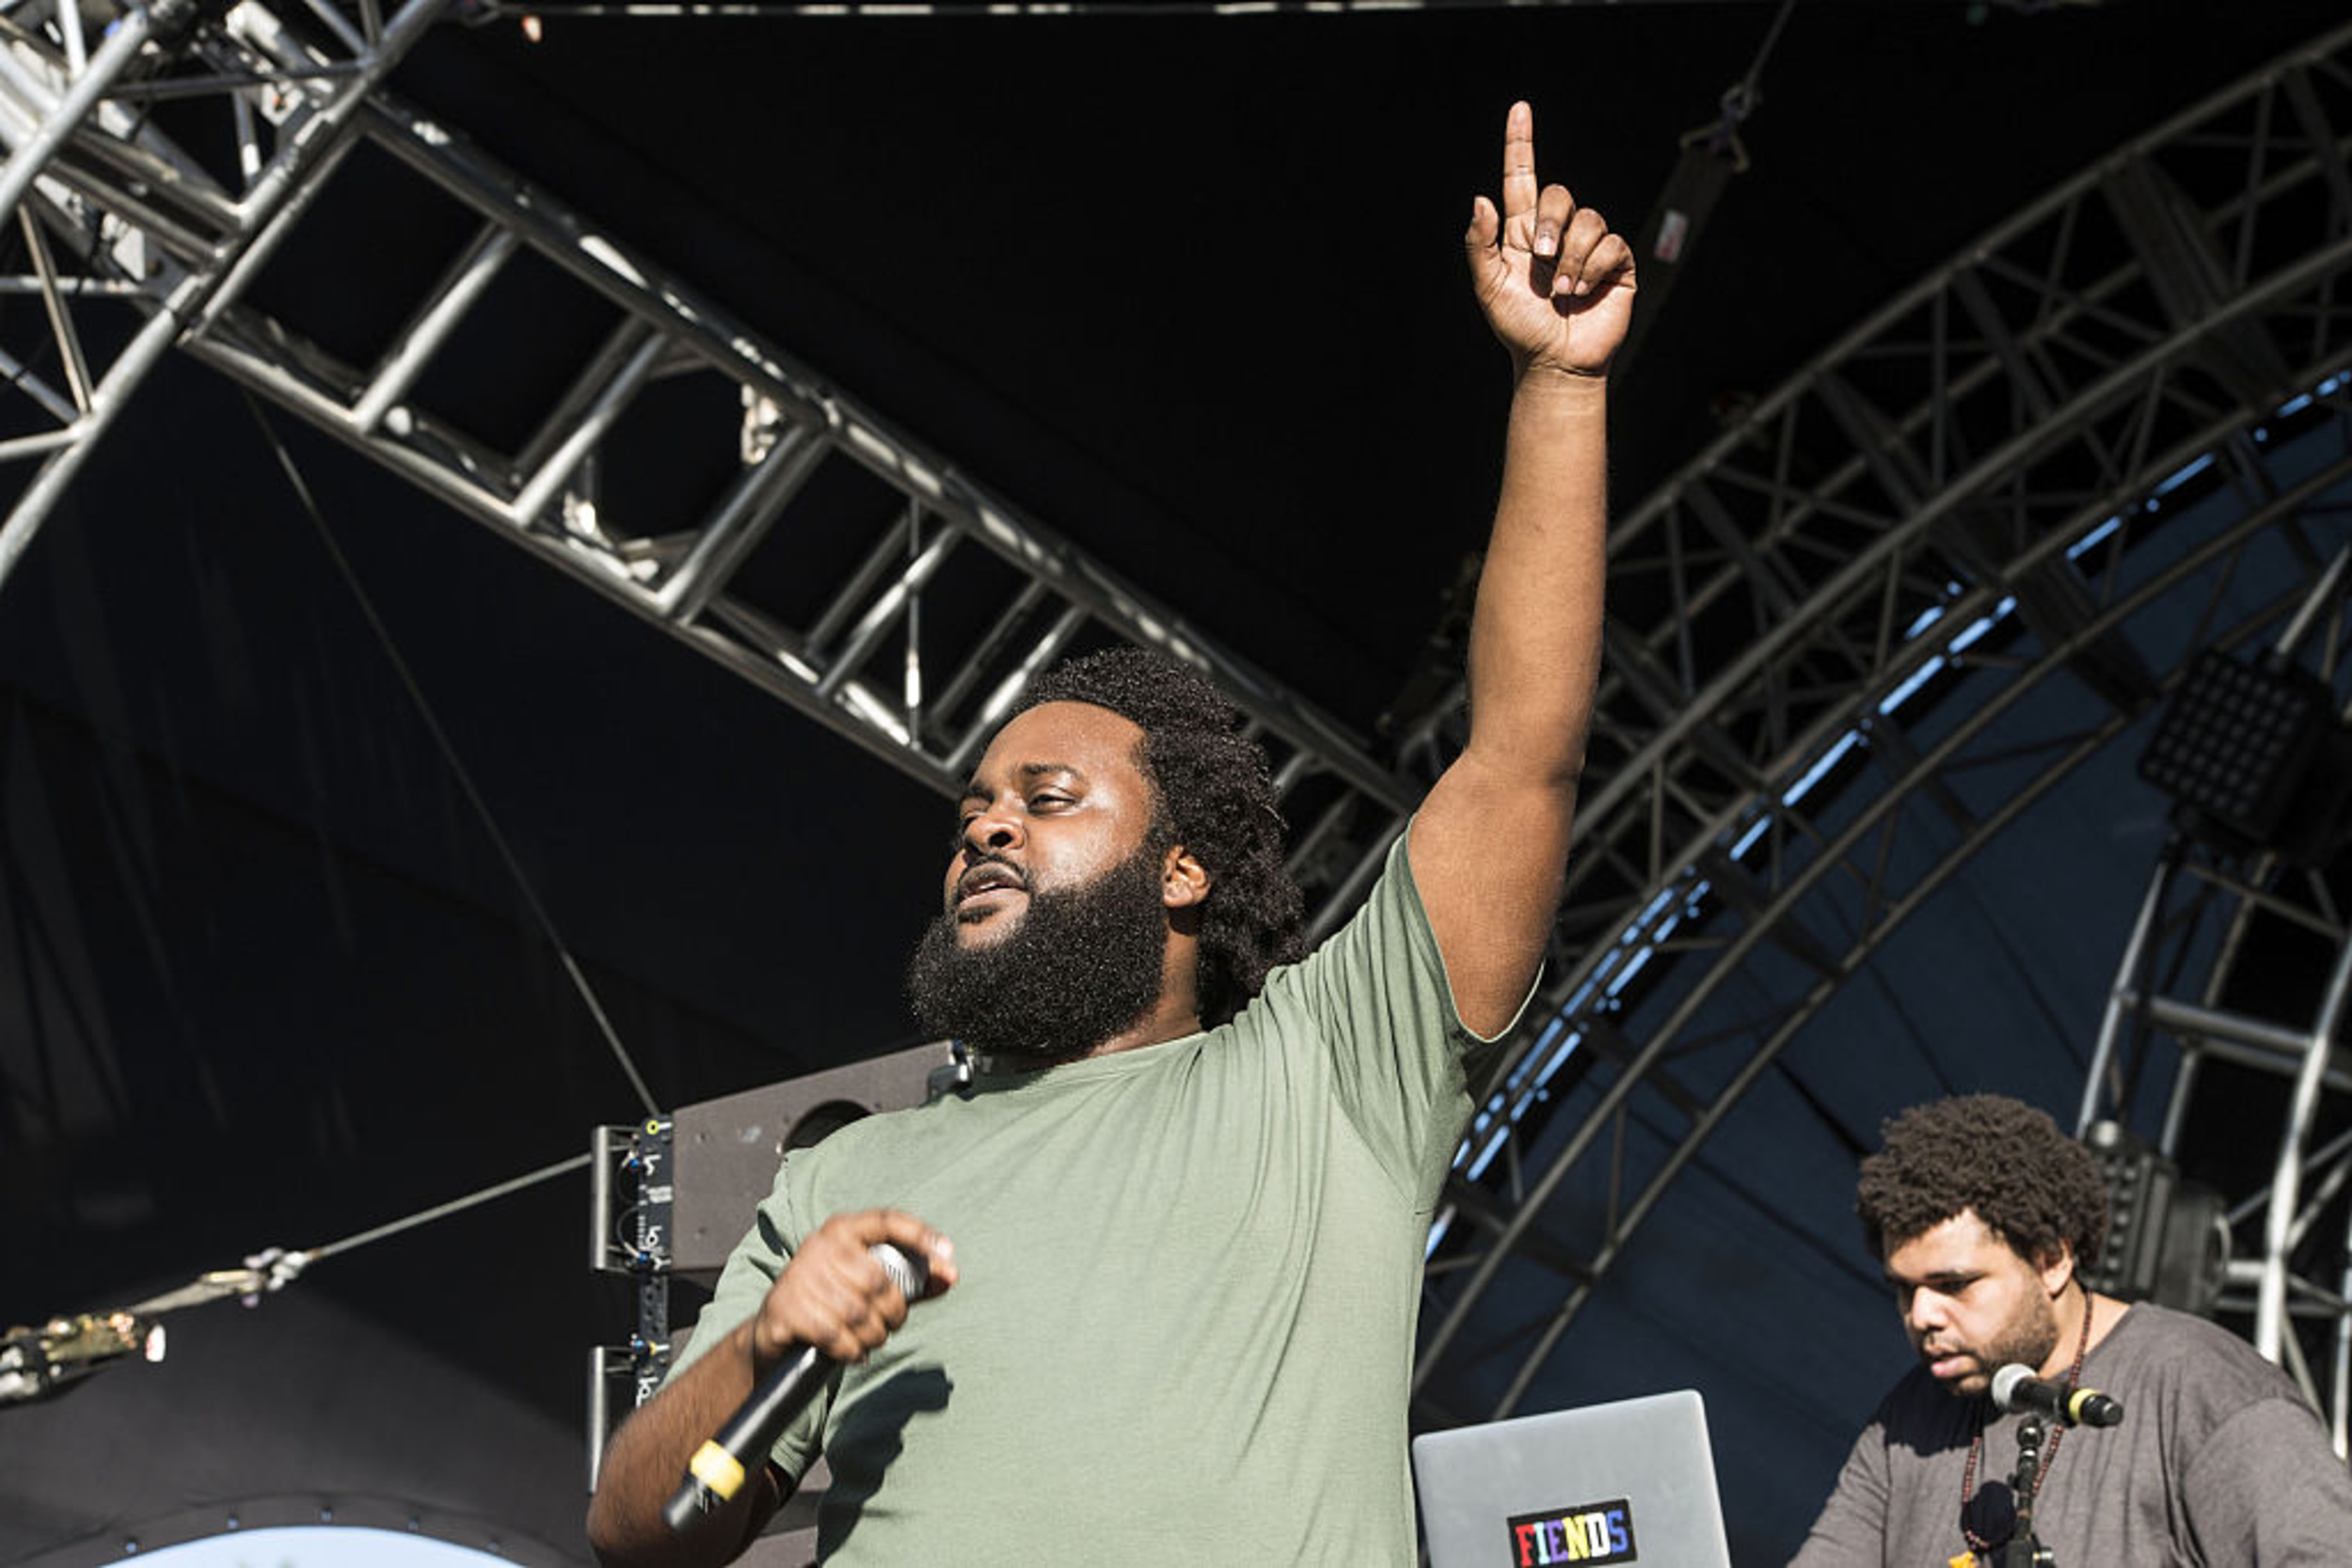 <p>In December 2023, Dreamville artist Bas released his long-awaited fourth album <em>We Only Talk About Real S—t  When We’re F—d  Up</em> which featured several collaborations alongside J. Cole, Amaarae, Adekunle Gold, and more. To help support the album, Bas is taking his music on the road with a 23-city North America tour. Bas will begin the tour on March 3rd in Dallas and wrap up on April 9th in New York. </p><p>You may also like: <a href='https://www.yardbarker.com/entertainment/articles/the_25_best_meryl_streep_films_031524/s1__34328741'>The 25 best Meryl Streep films</a></p>